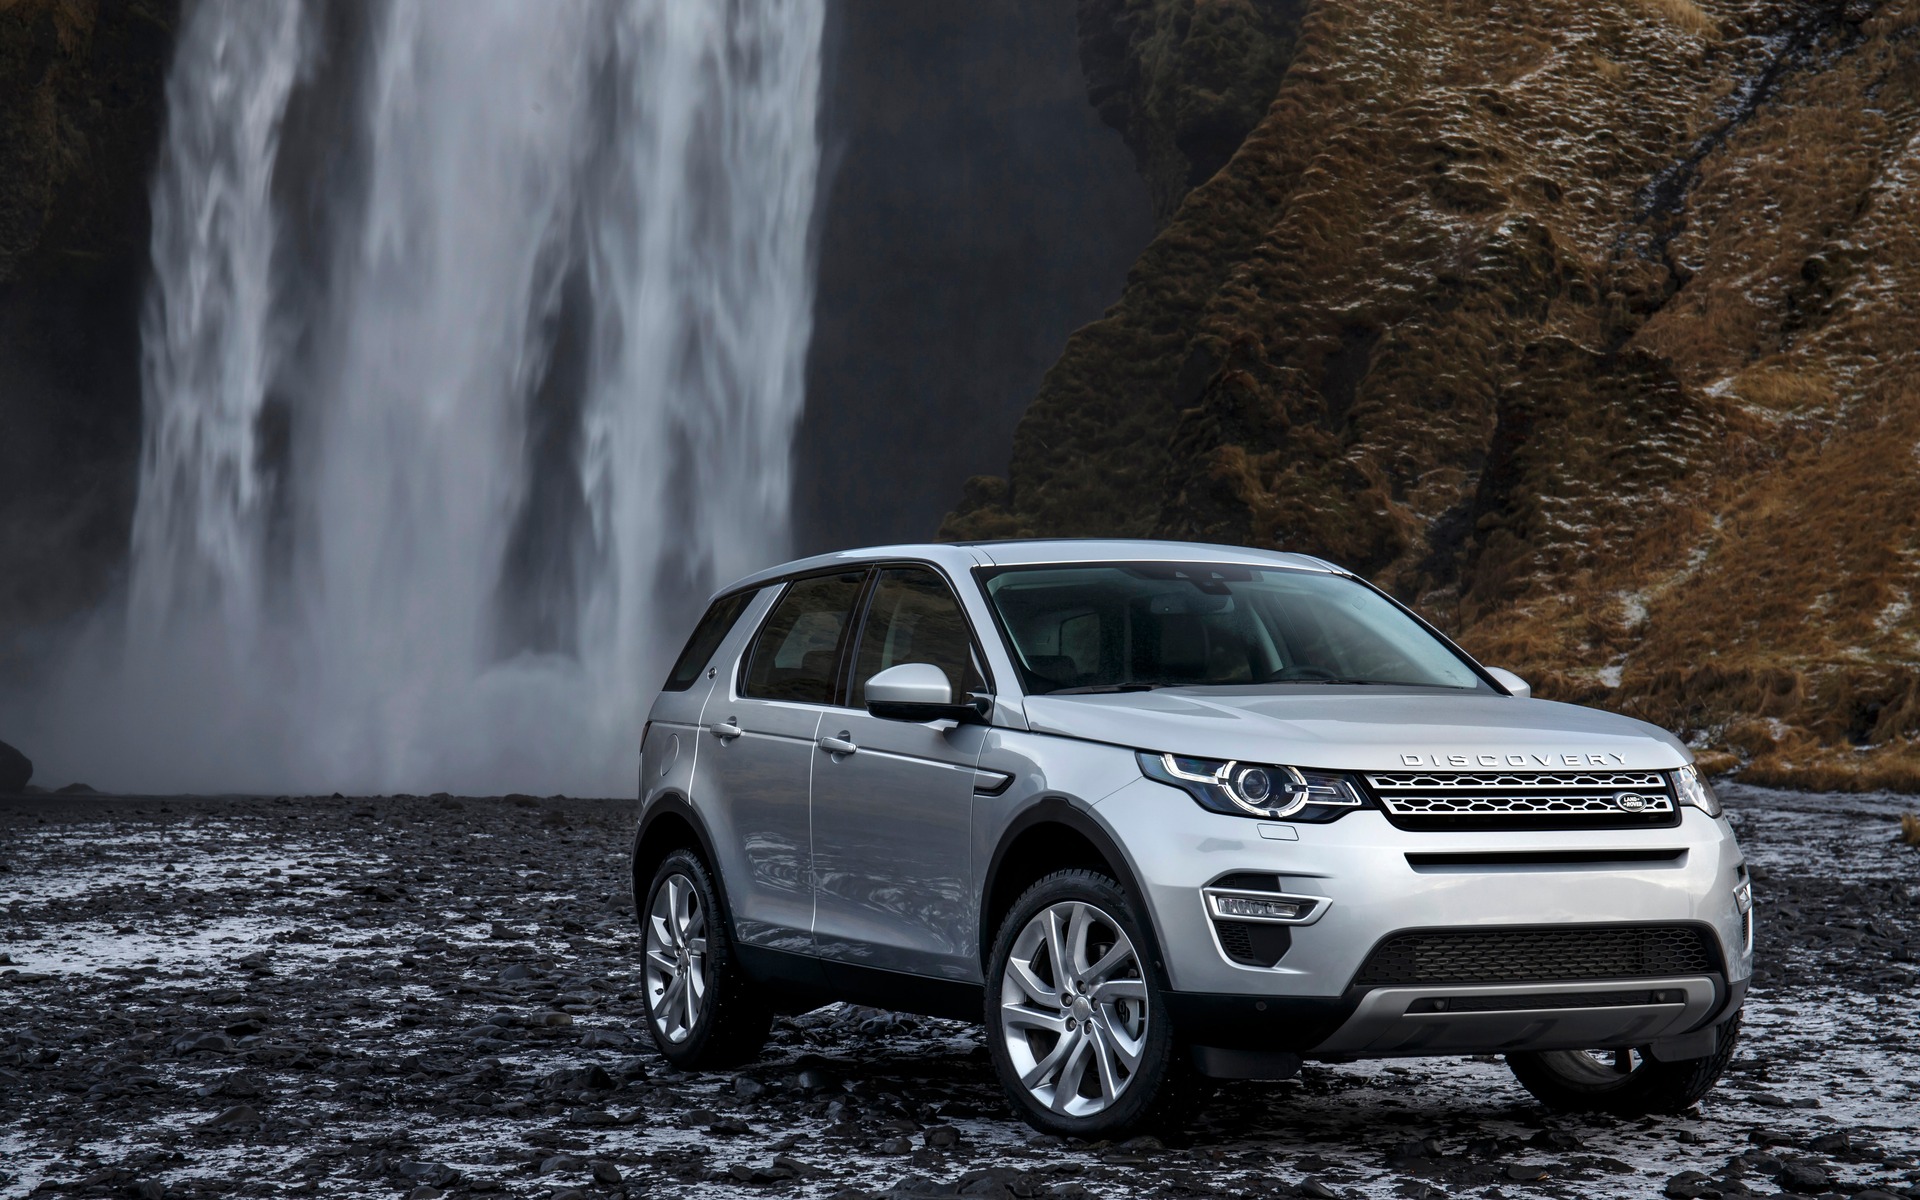 2015 Land Rover Discovery Sport: Built Versatility - The Car Guide